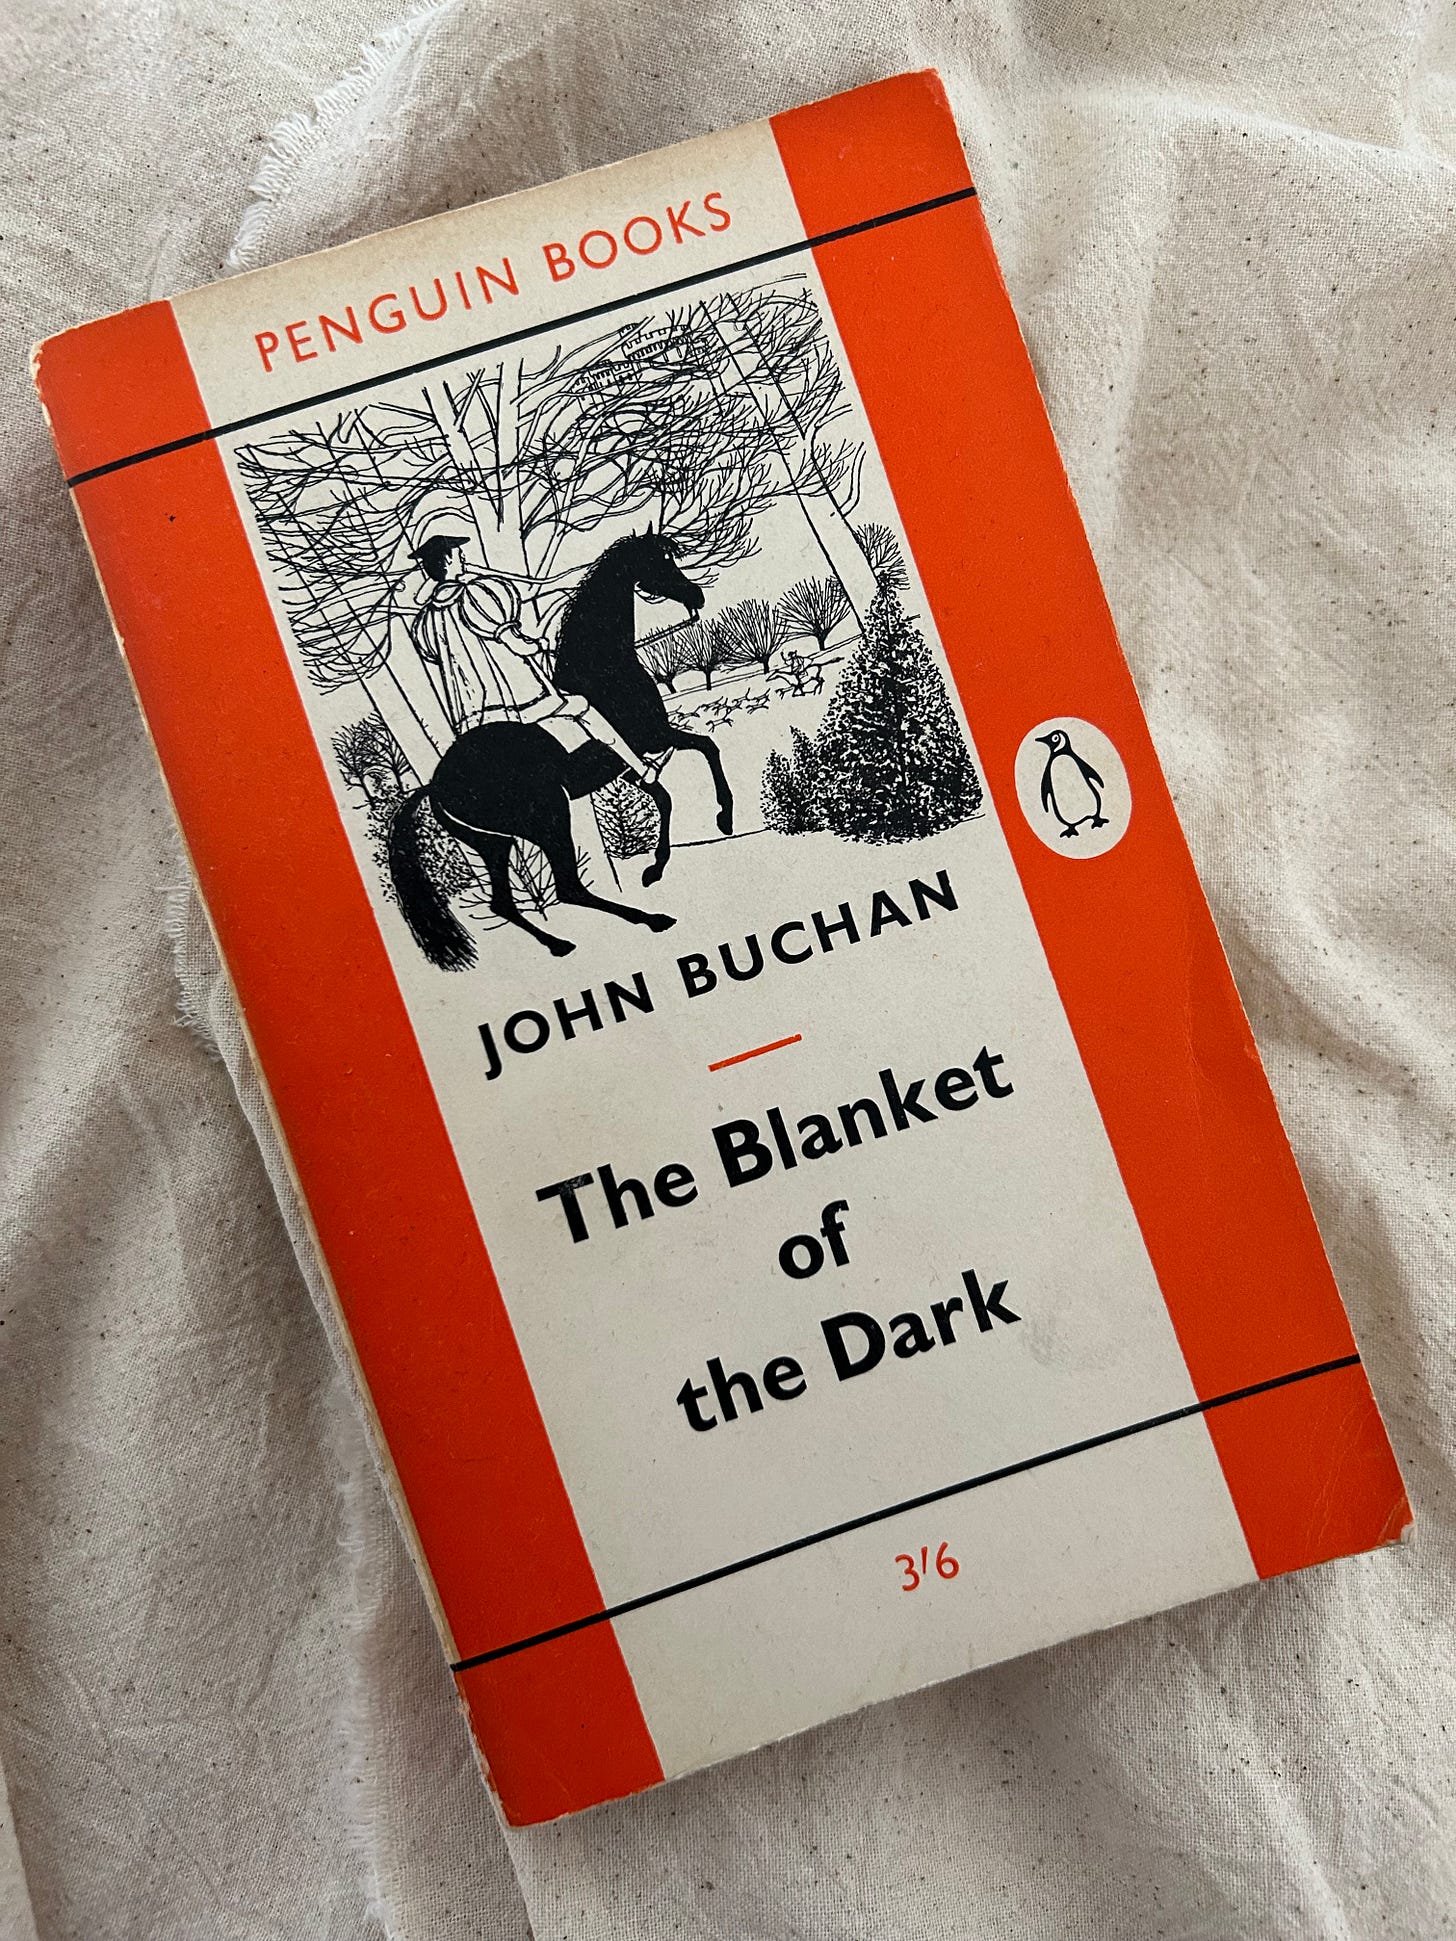 An orange penguin edition of The Blanket of the Dark by John Buchan. The cover features a young man on a horse riding through woodlands, and watching a hunt in the distance.